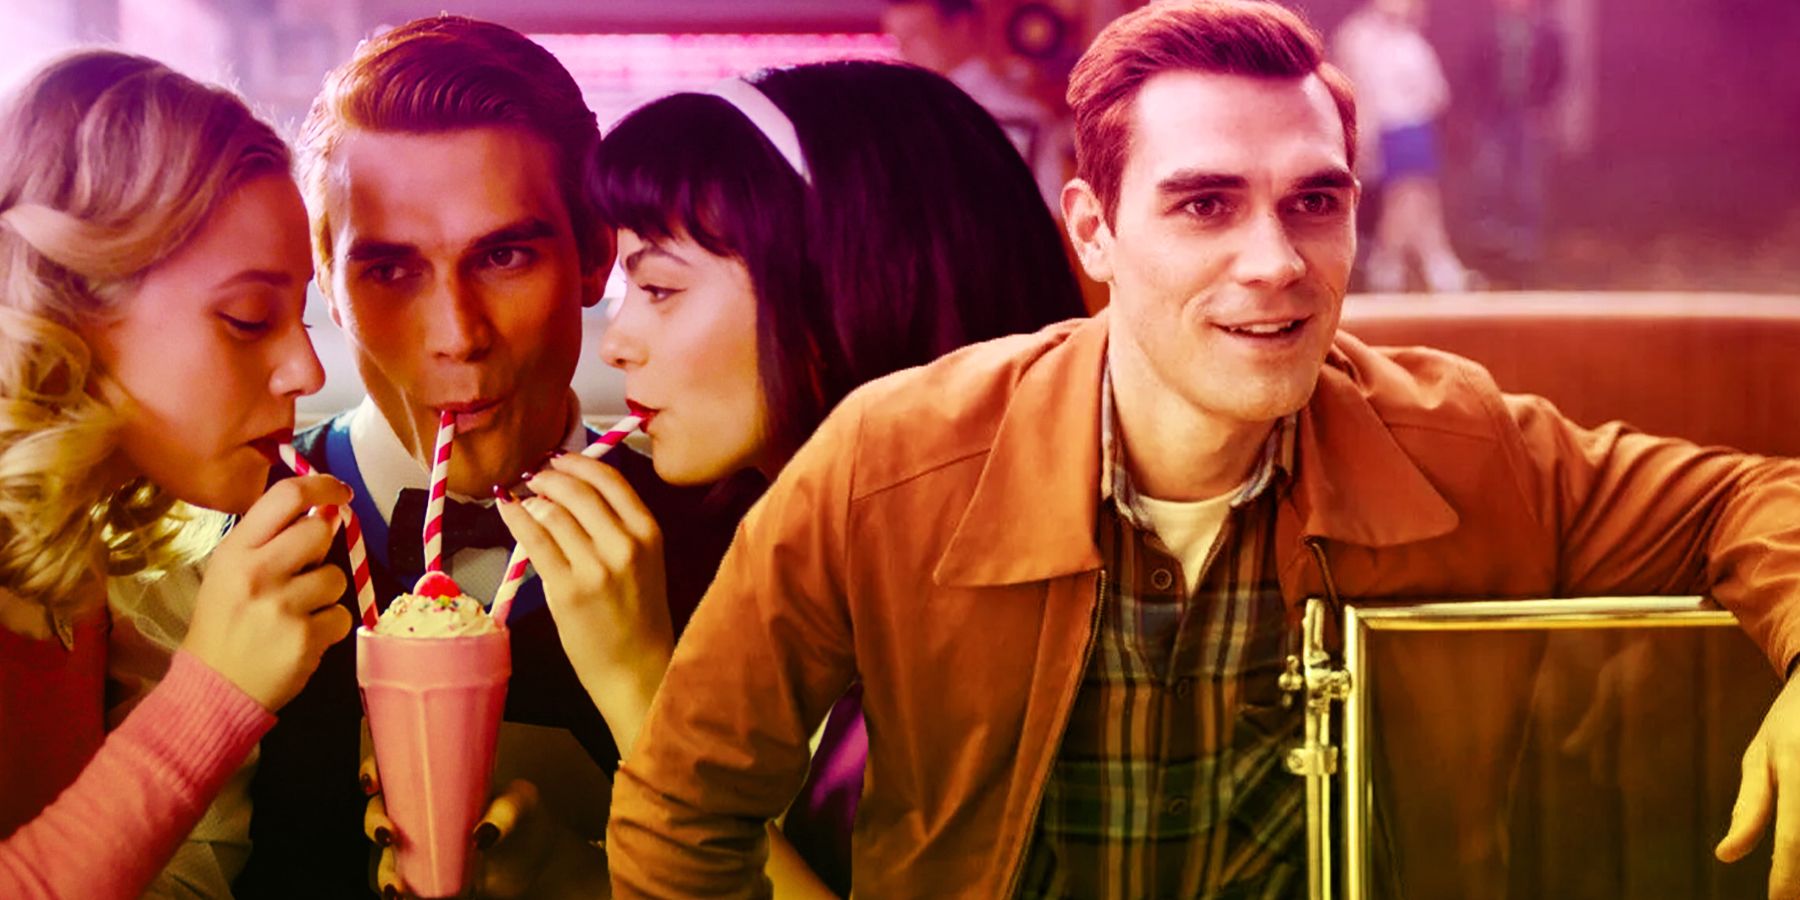 On the left, Veronica, Archie and Betty share a milkshake with 3 straws. On the right, Archie looks off to the distant right with a smile. 